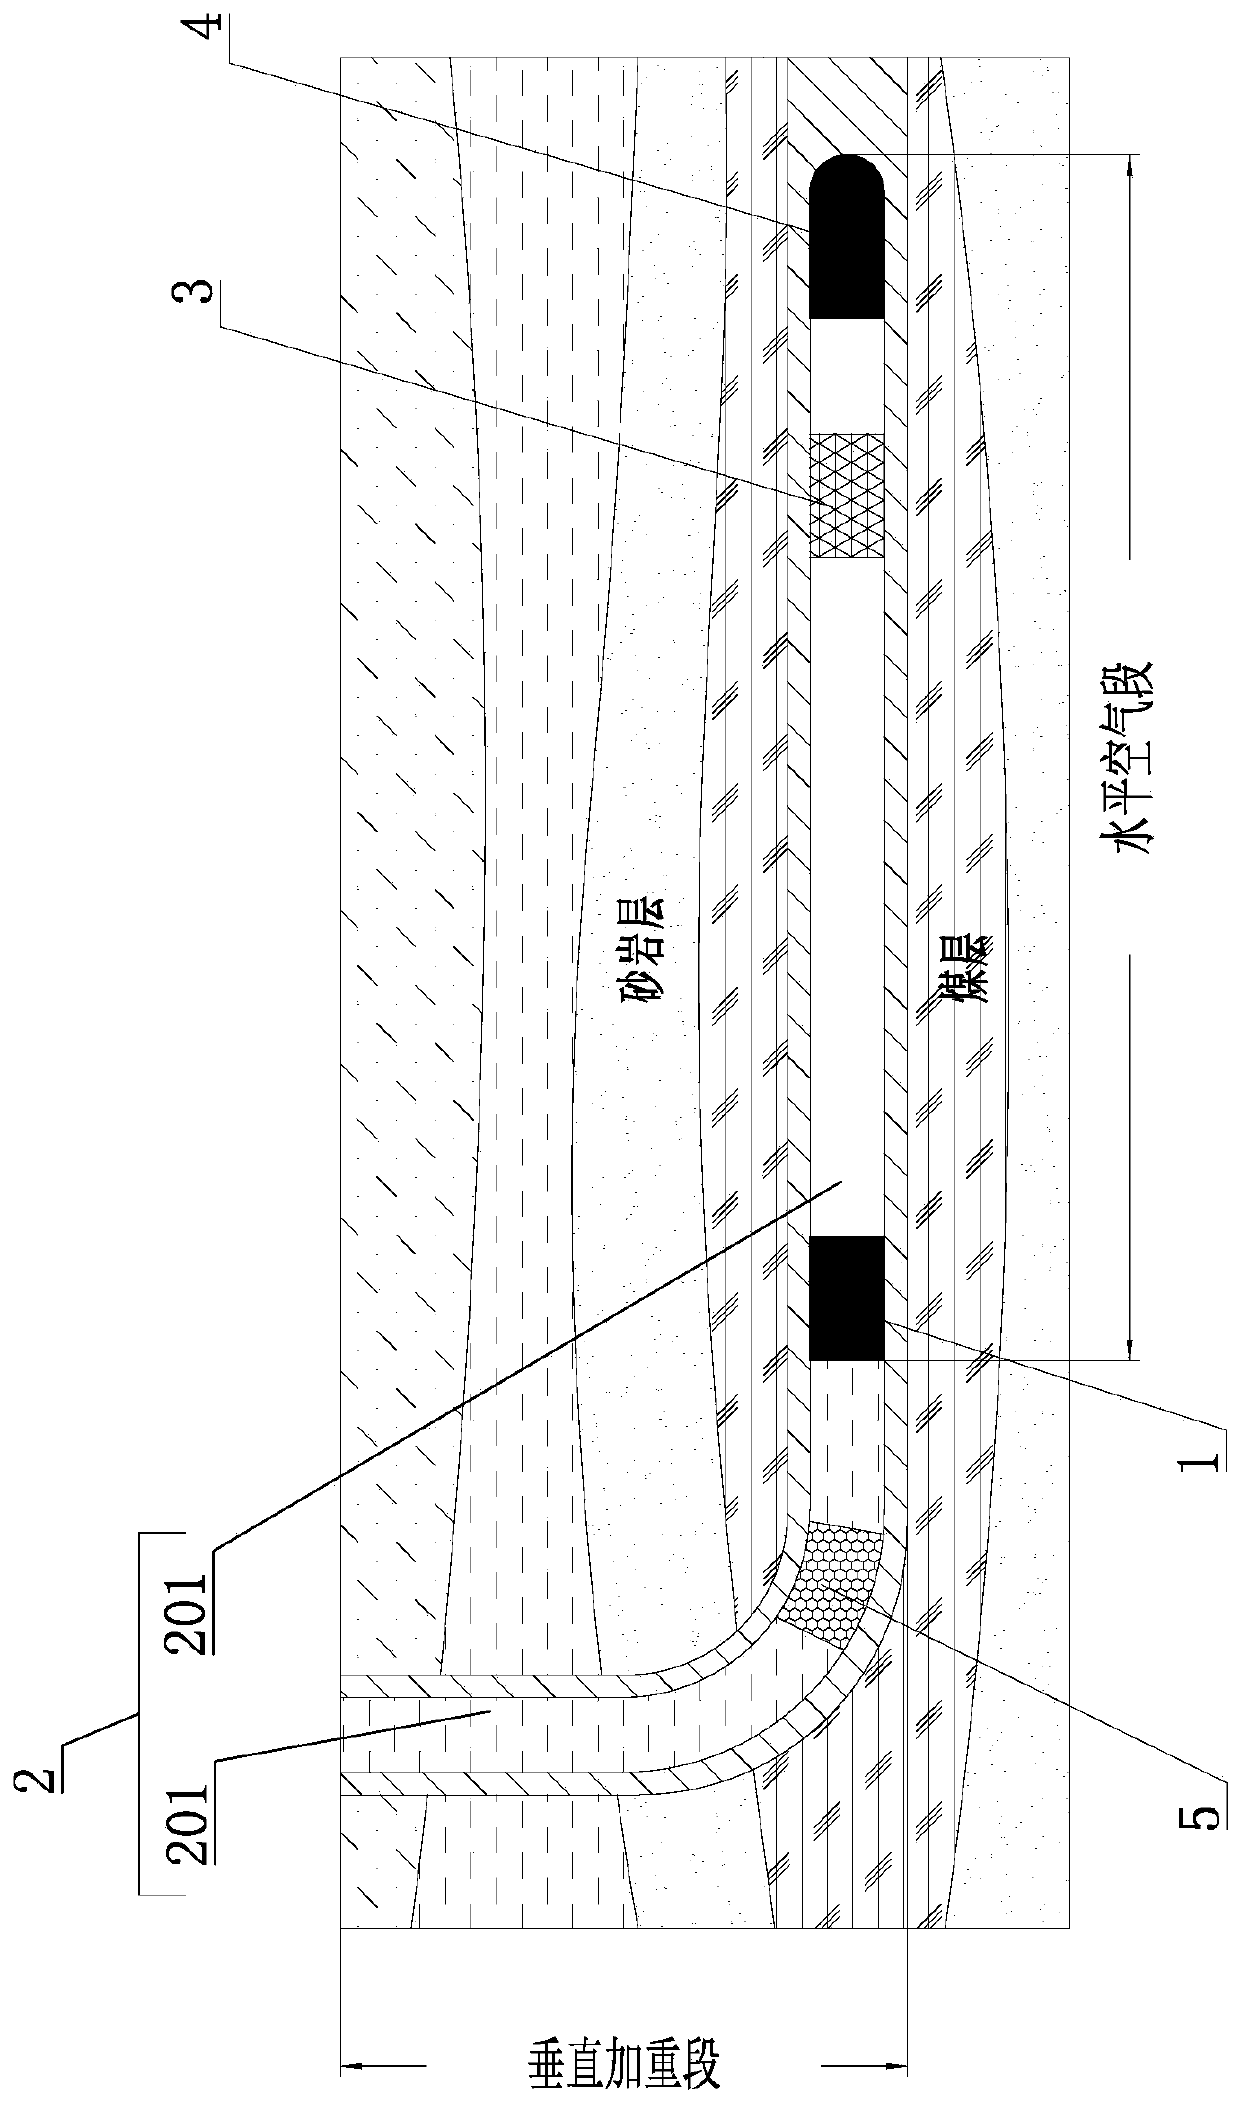 Extending casing running device for coal bed methane horizontal well